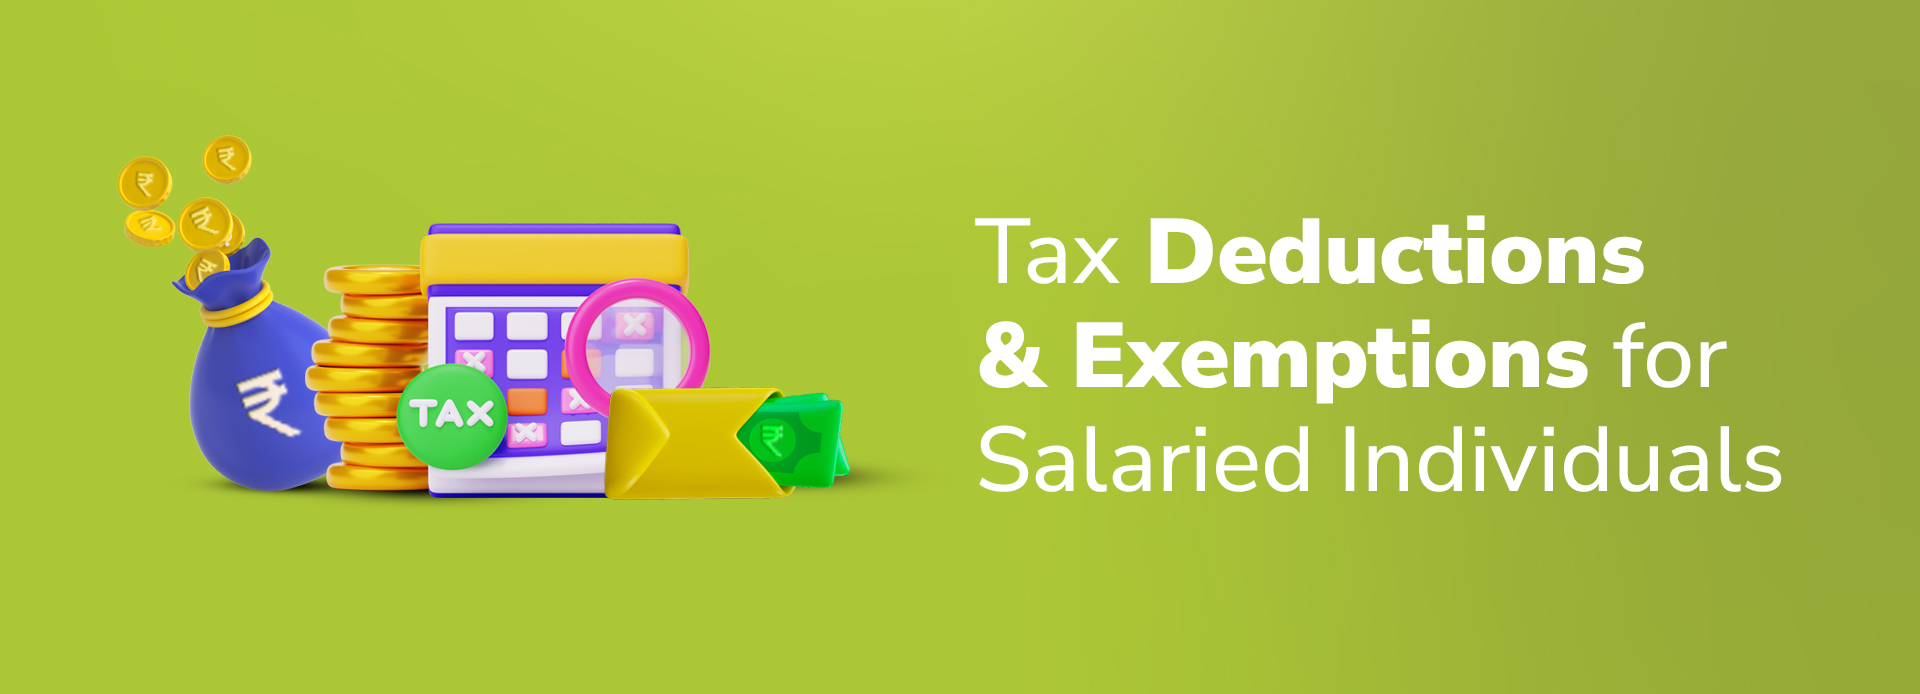 How to Maximise Tax Deductions & Exemptions for Salaried Individuals?